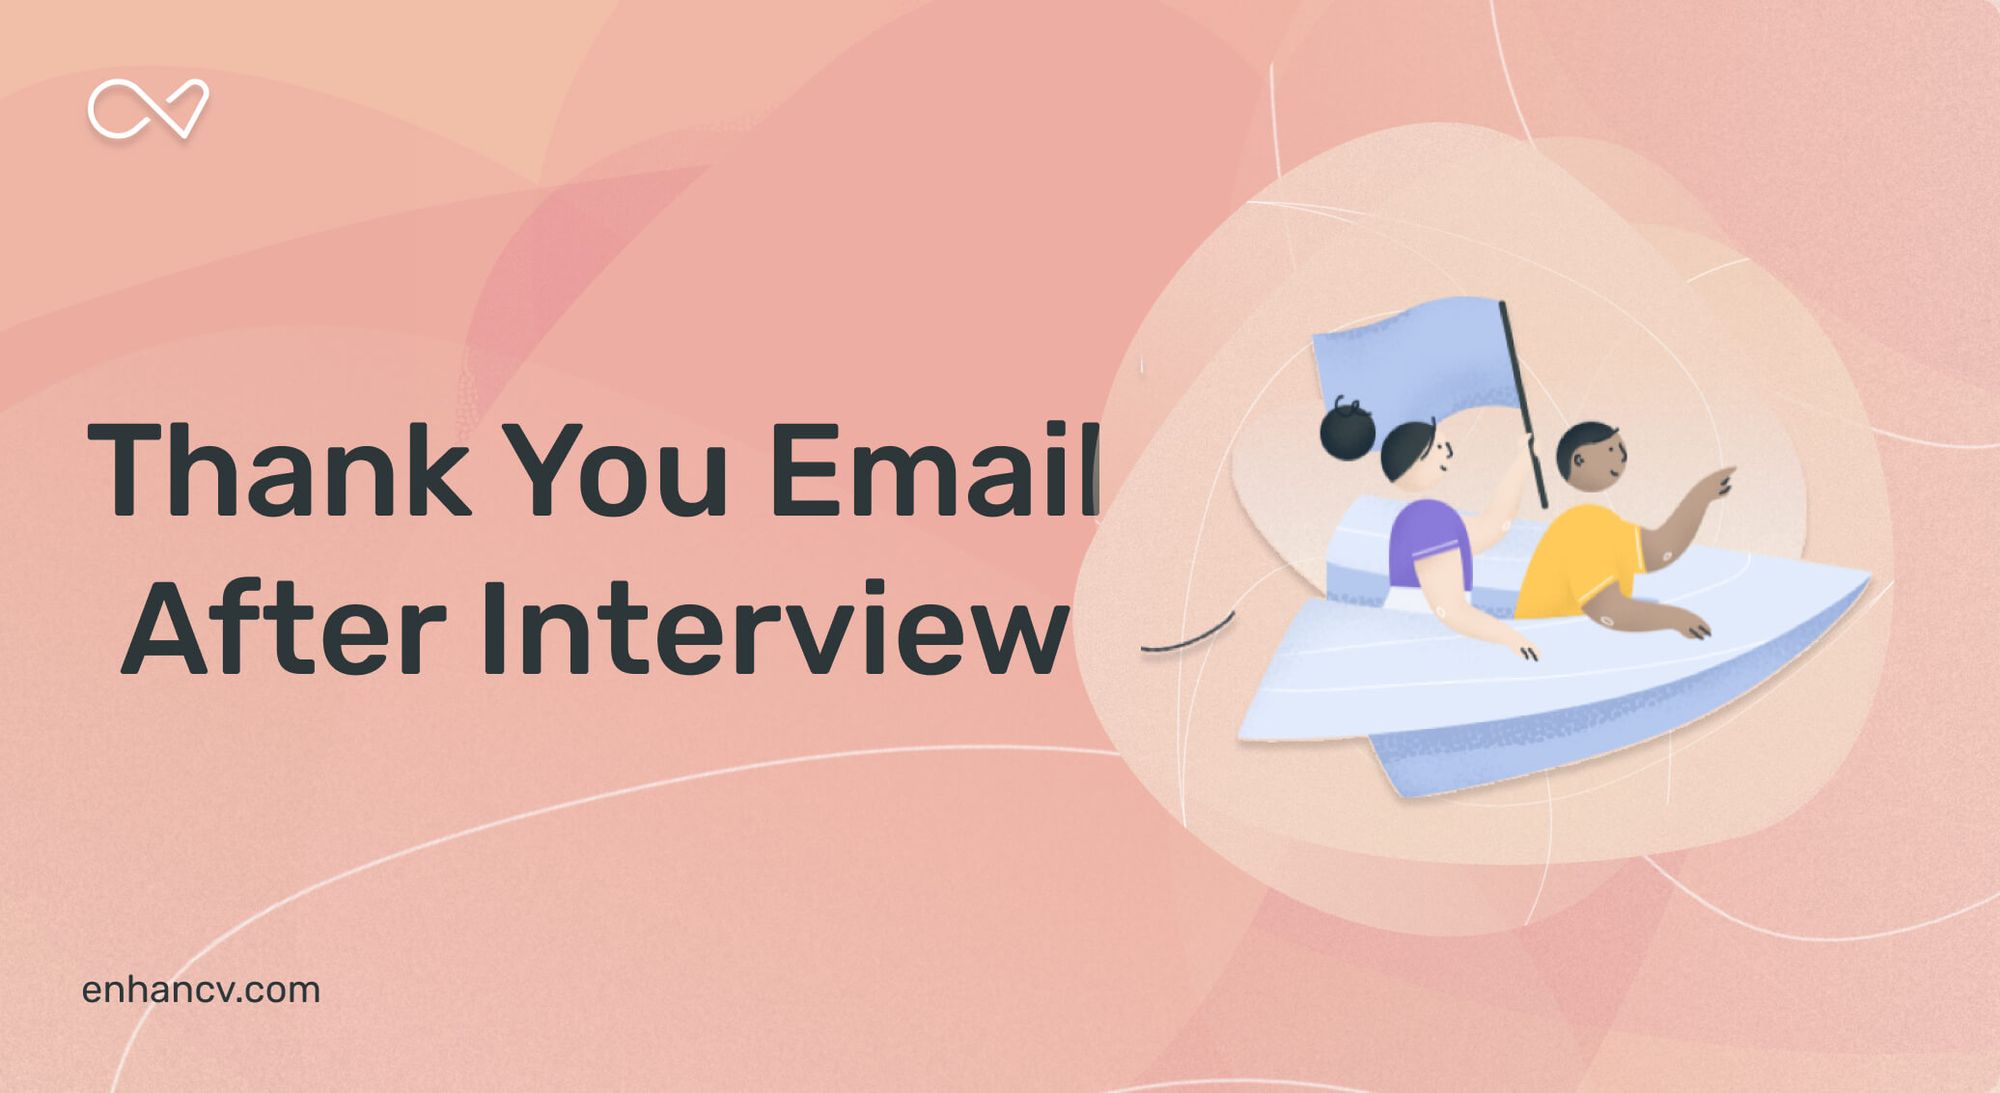 How to Write a 'Thank You' Email After Interview